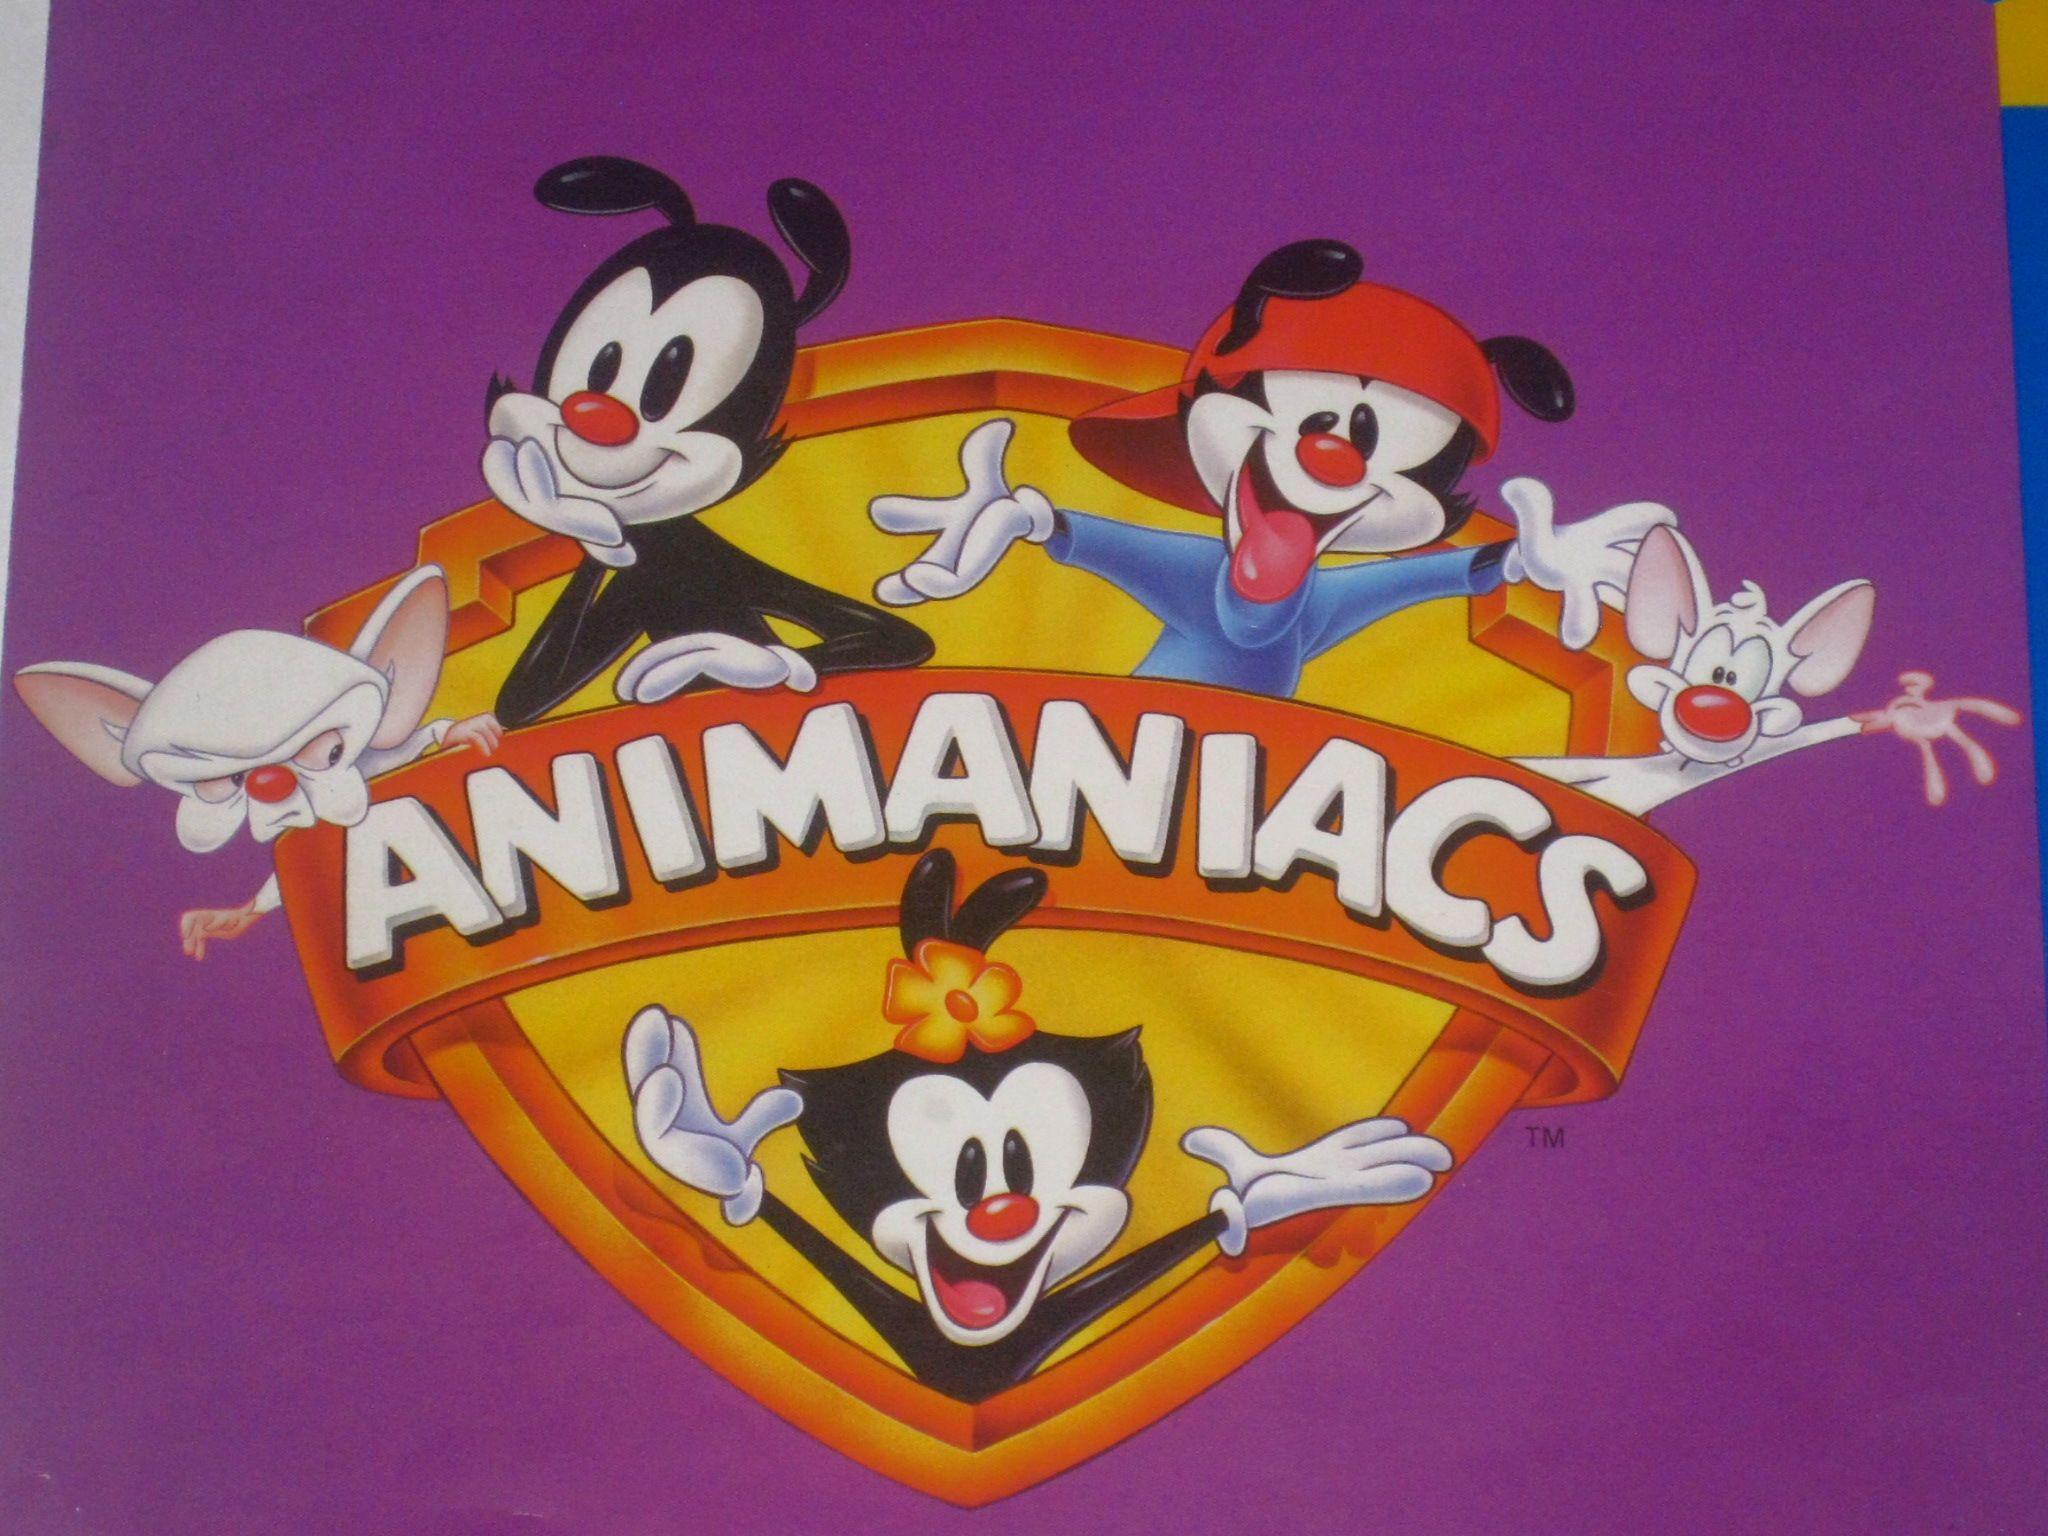 Animaniacs Wallpapers For Free, Animaniacs, Cartoons